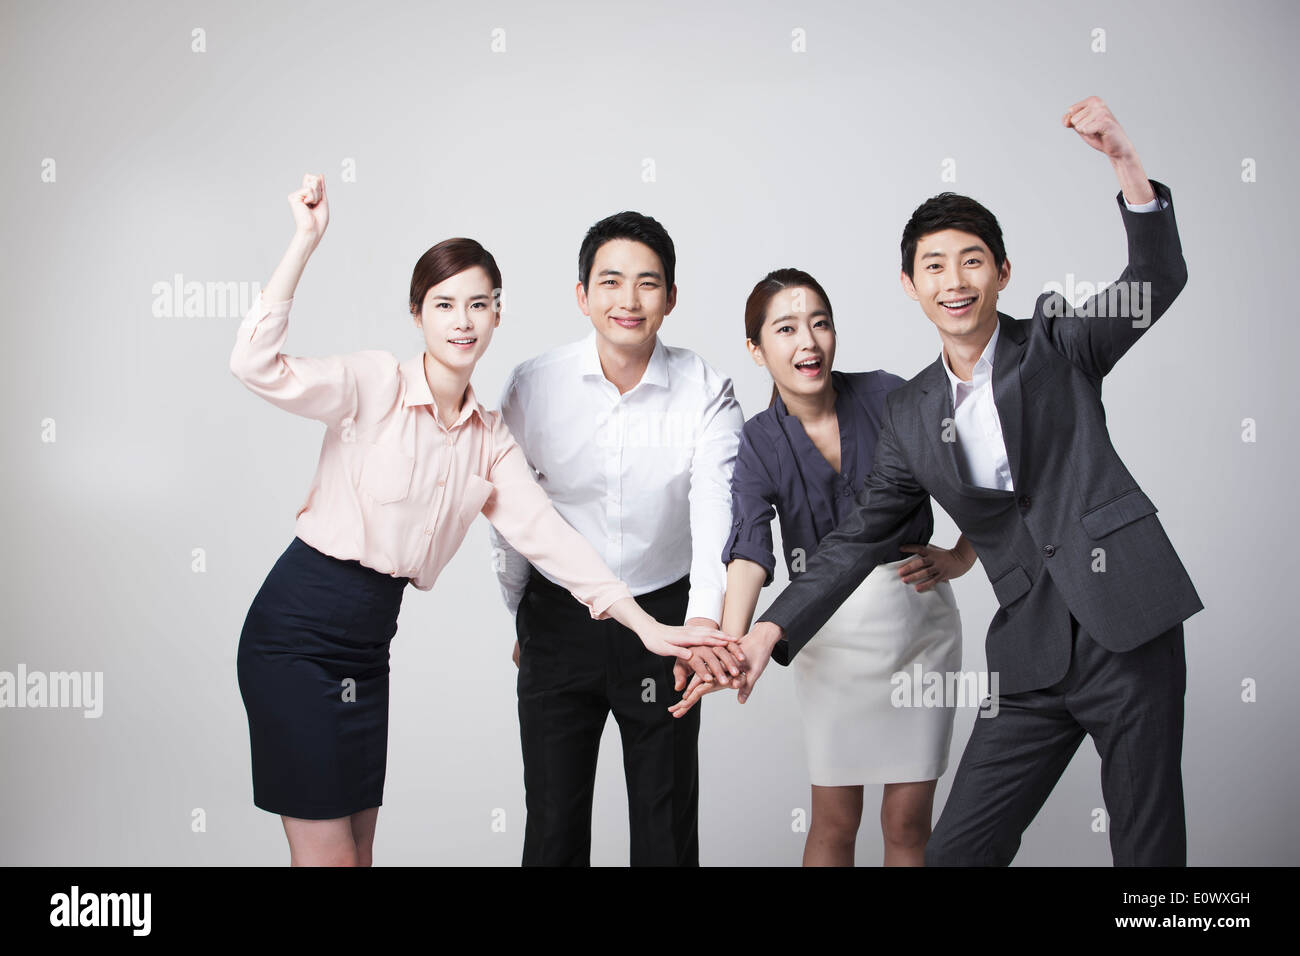 business people with team spirit Stock Photo